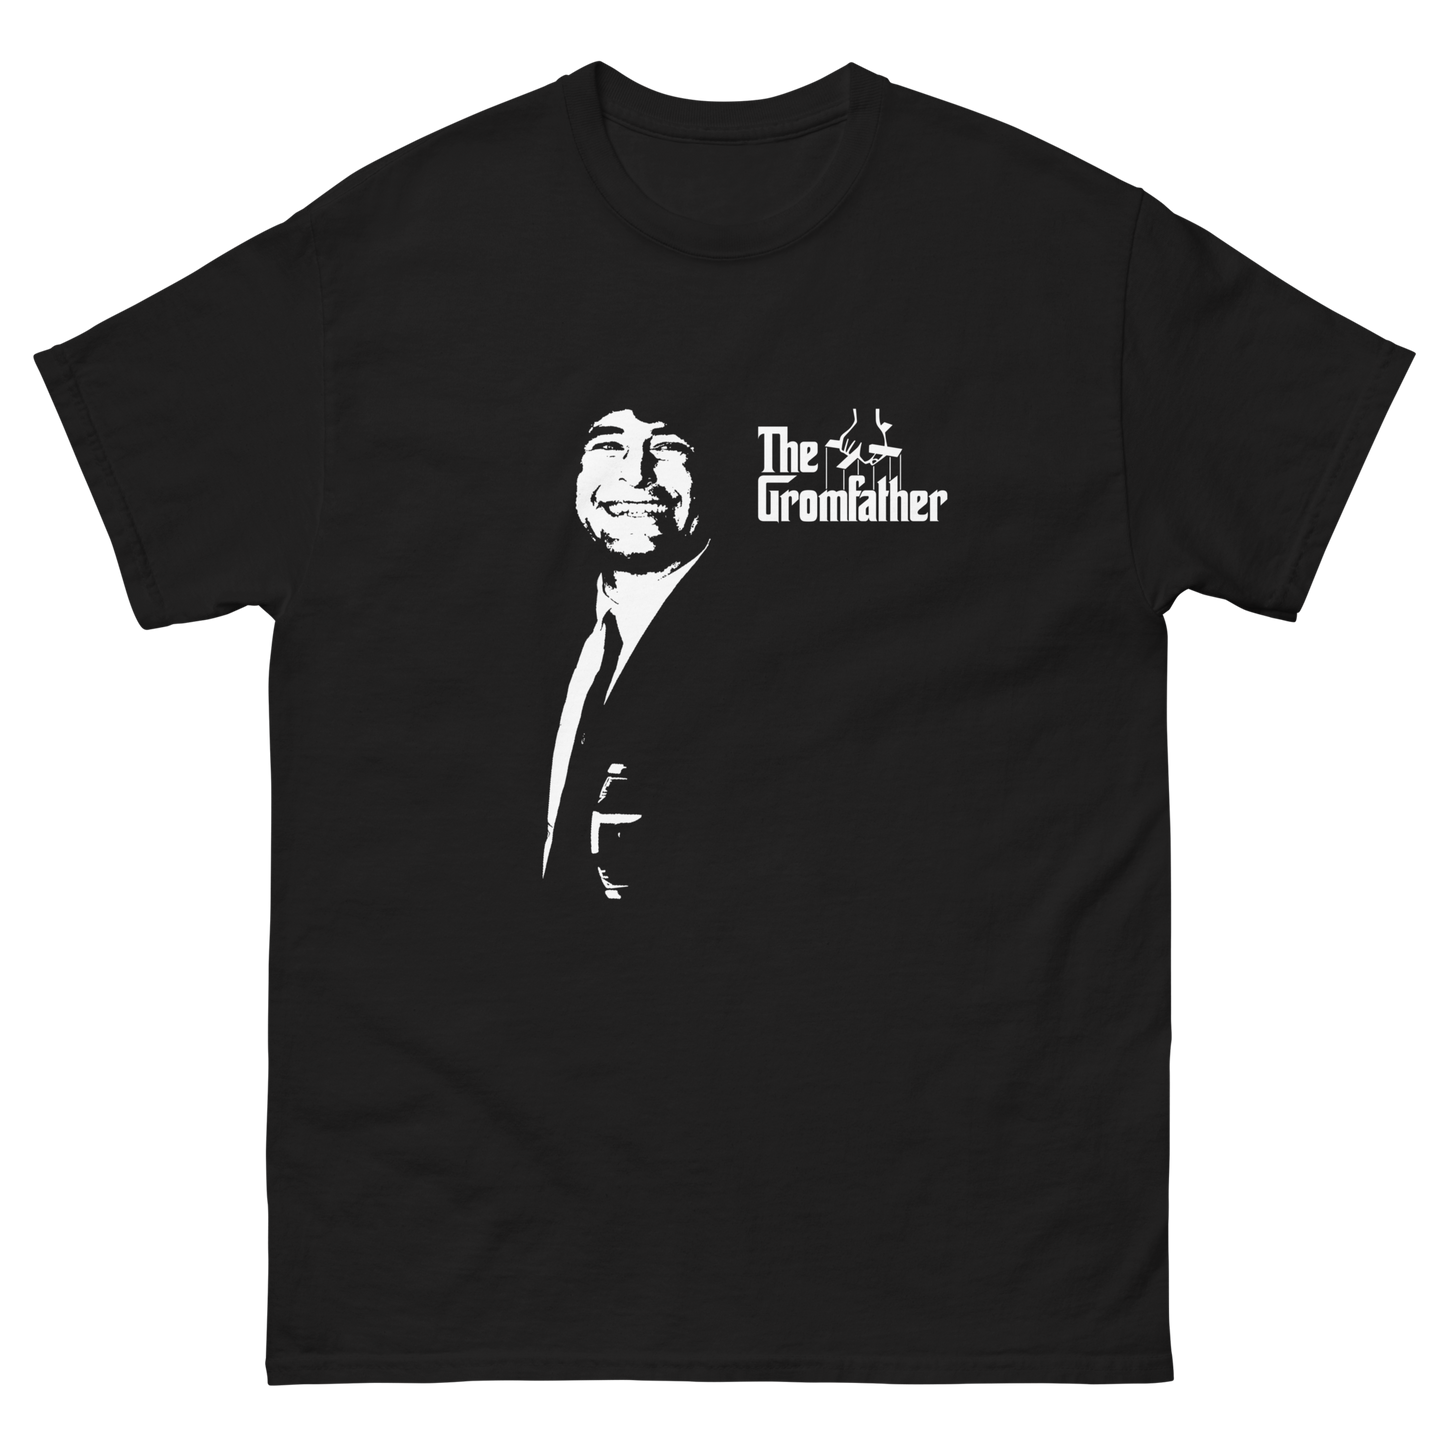 The Gromfather Tee